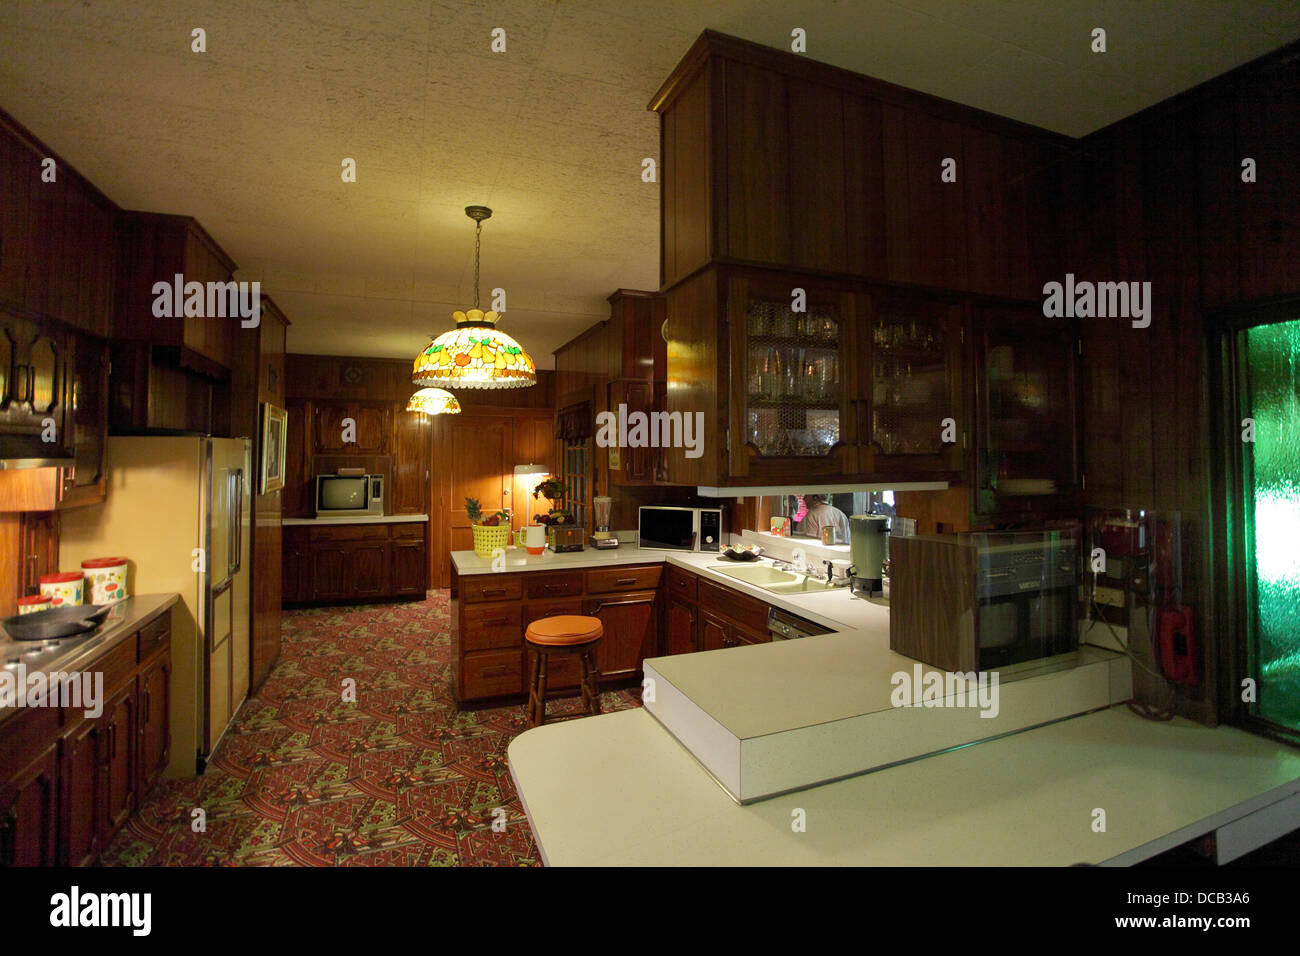 The Kitchen at Graceland the home of Elvis Presley in Memphis Tennessee USA Stock Photo